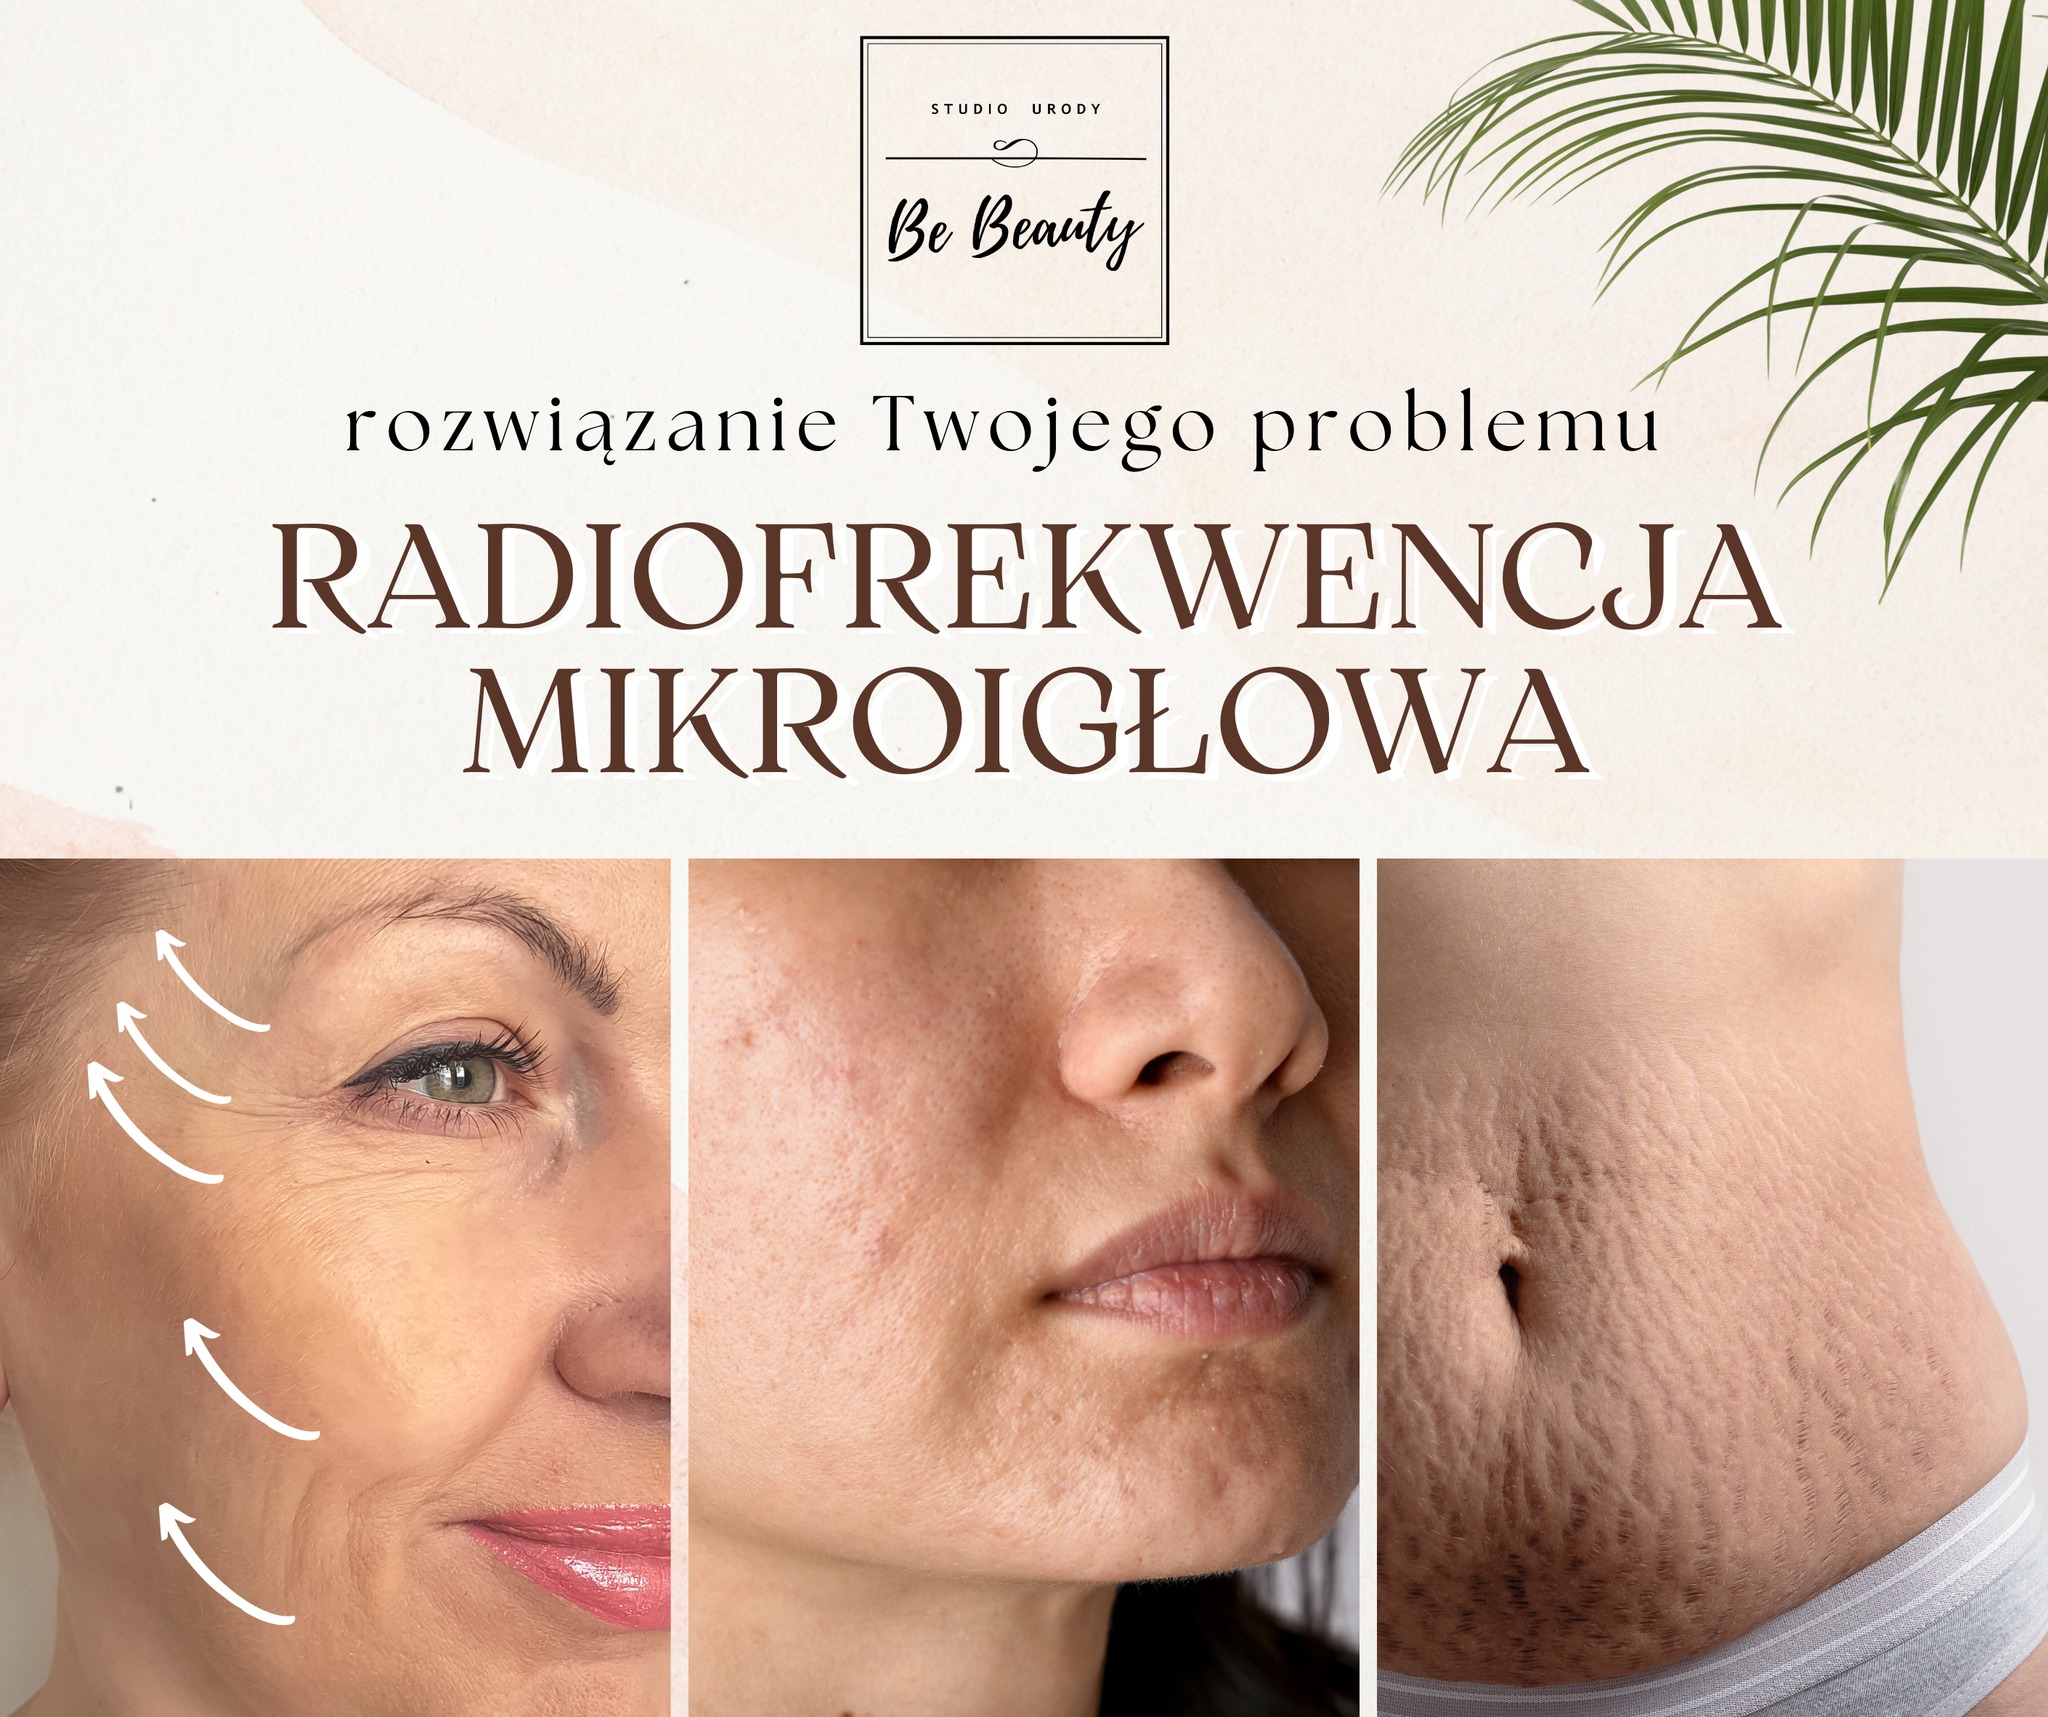 Read more about the article Radiofrekwencja Mikroigłowa